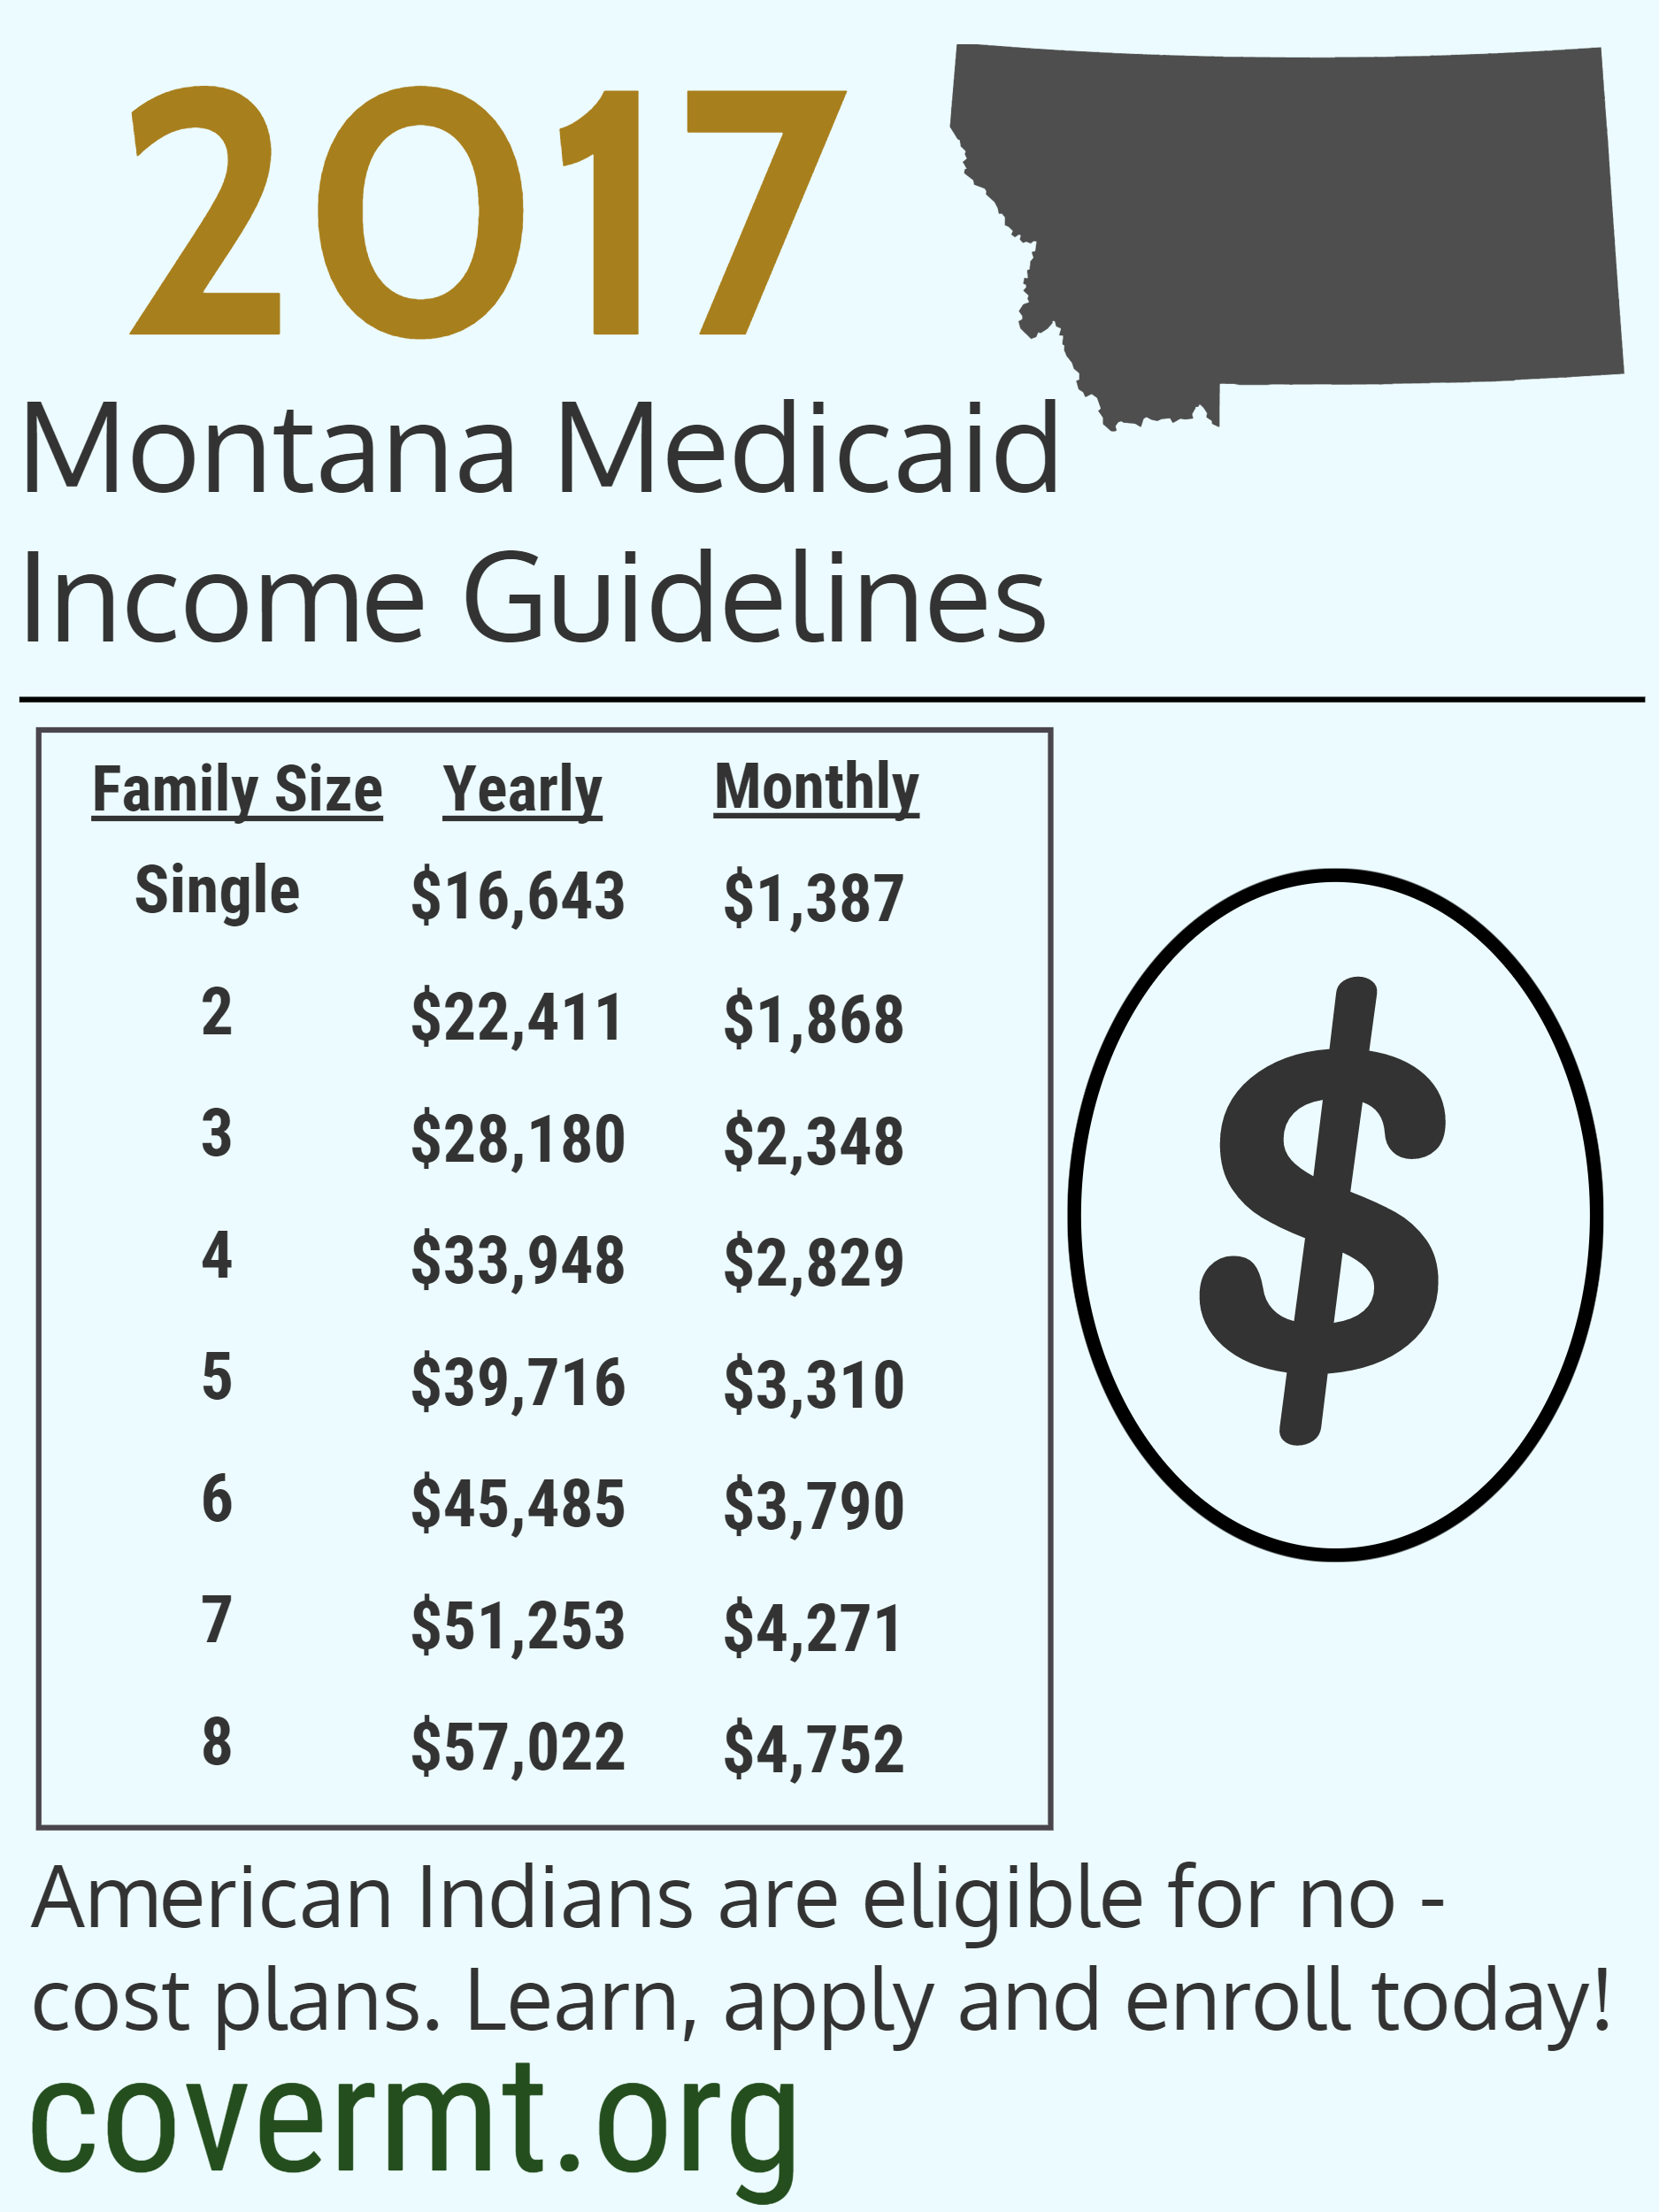 Medicaid Expansion and Montana Veterans